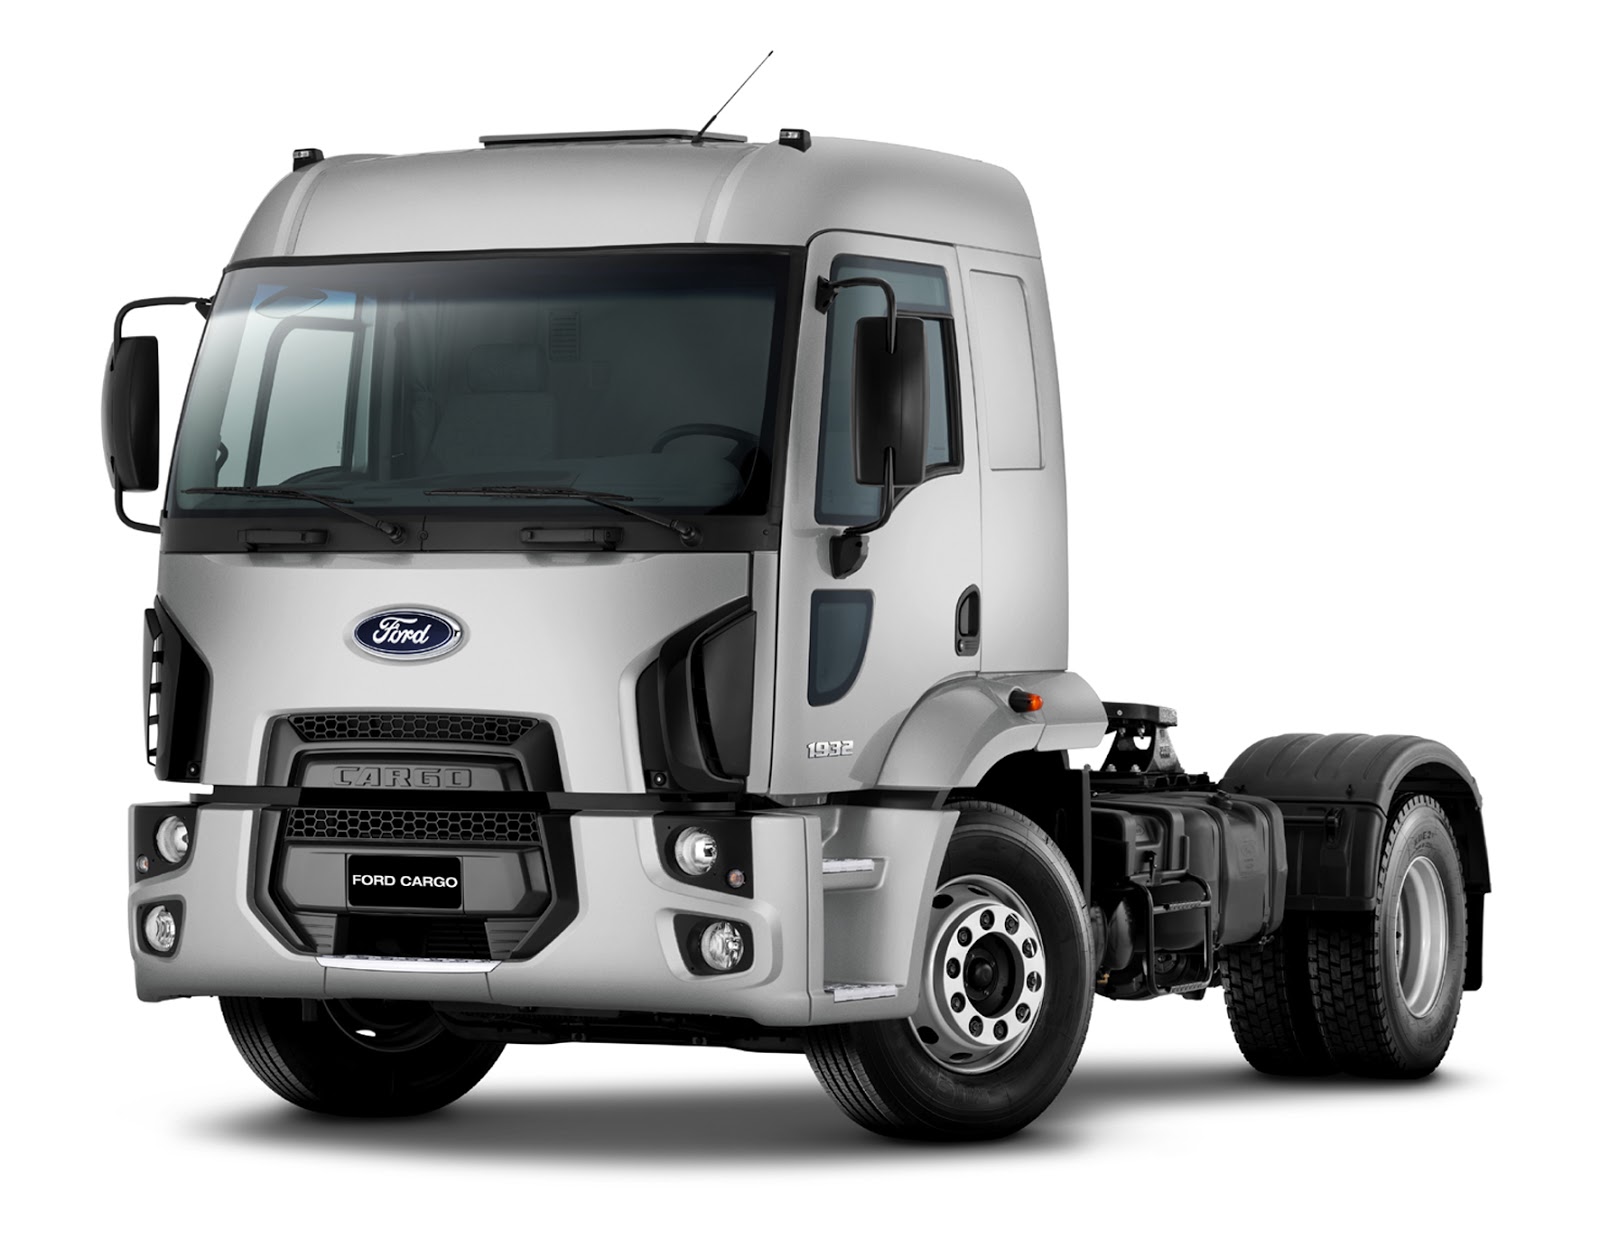 Ford cargo 2015 photo - 3